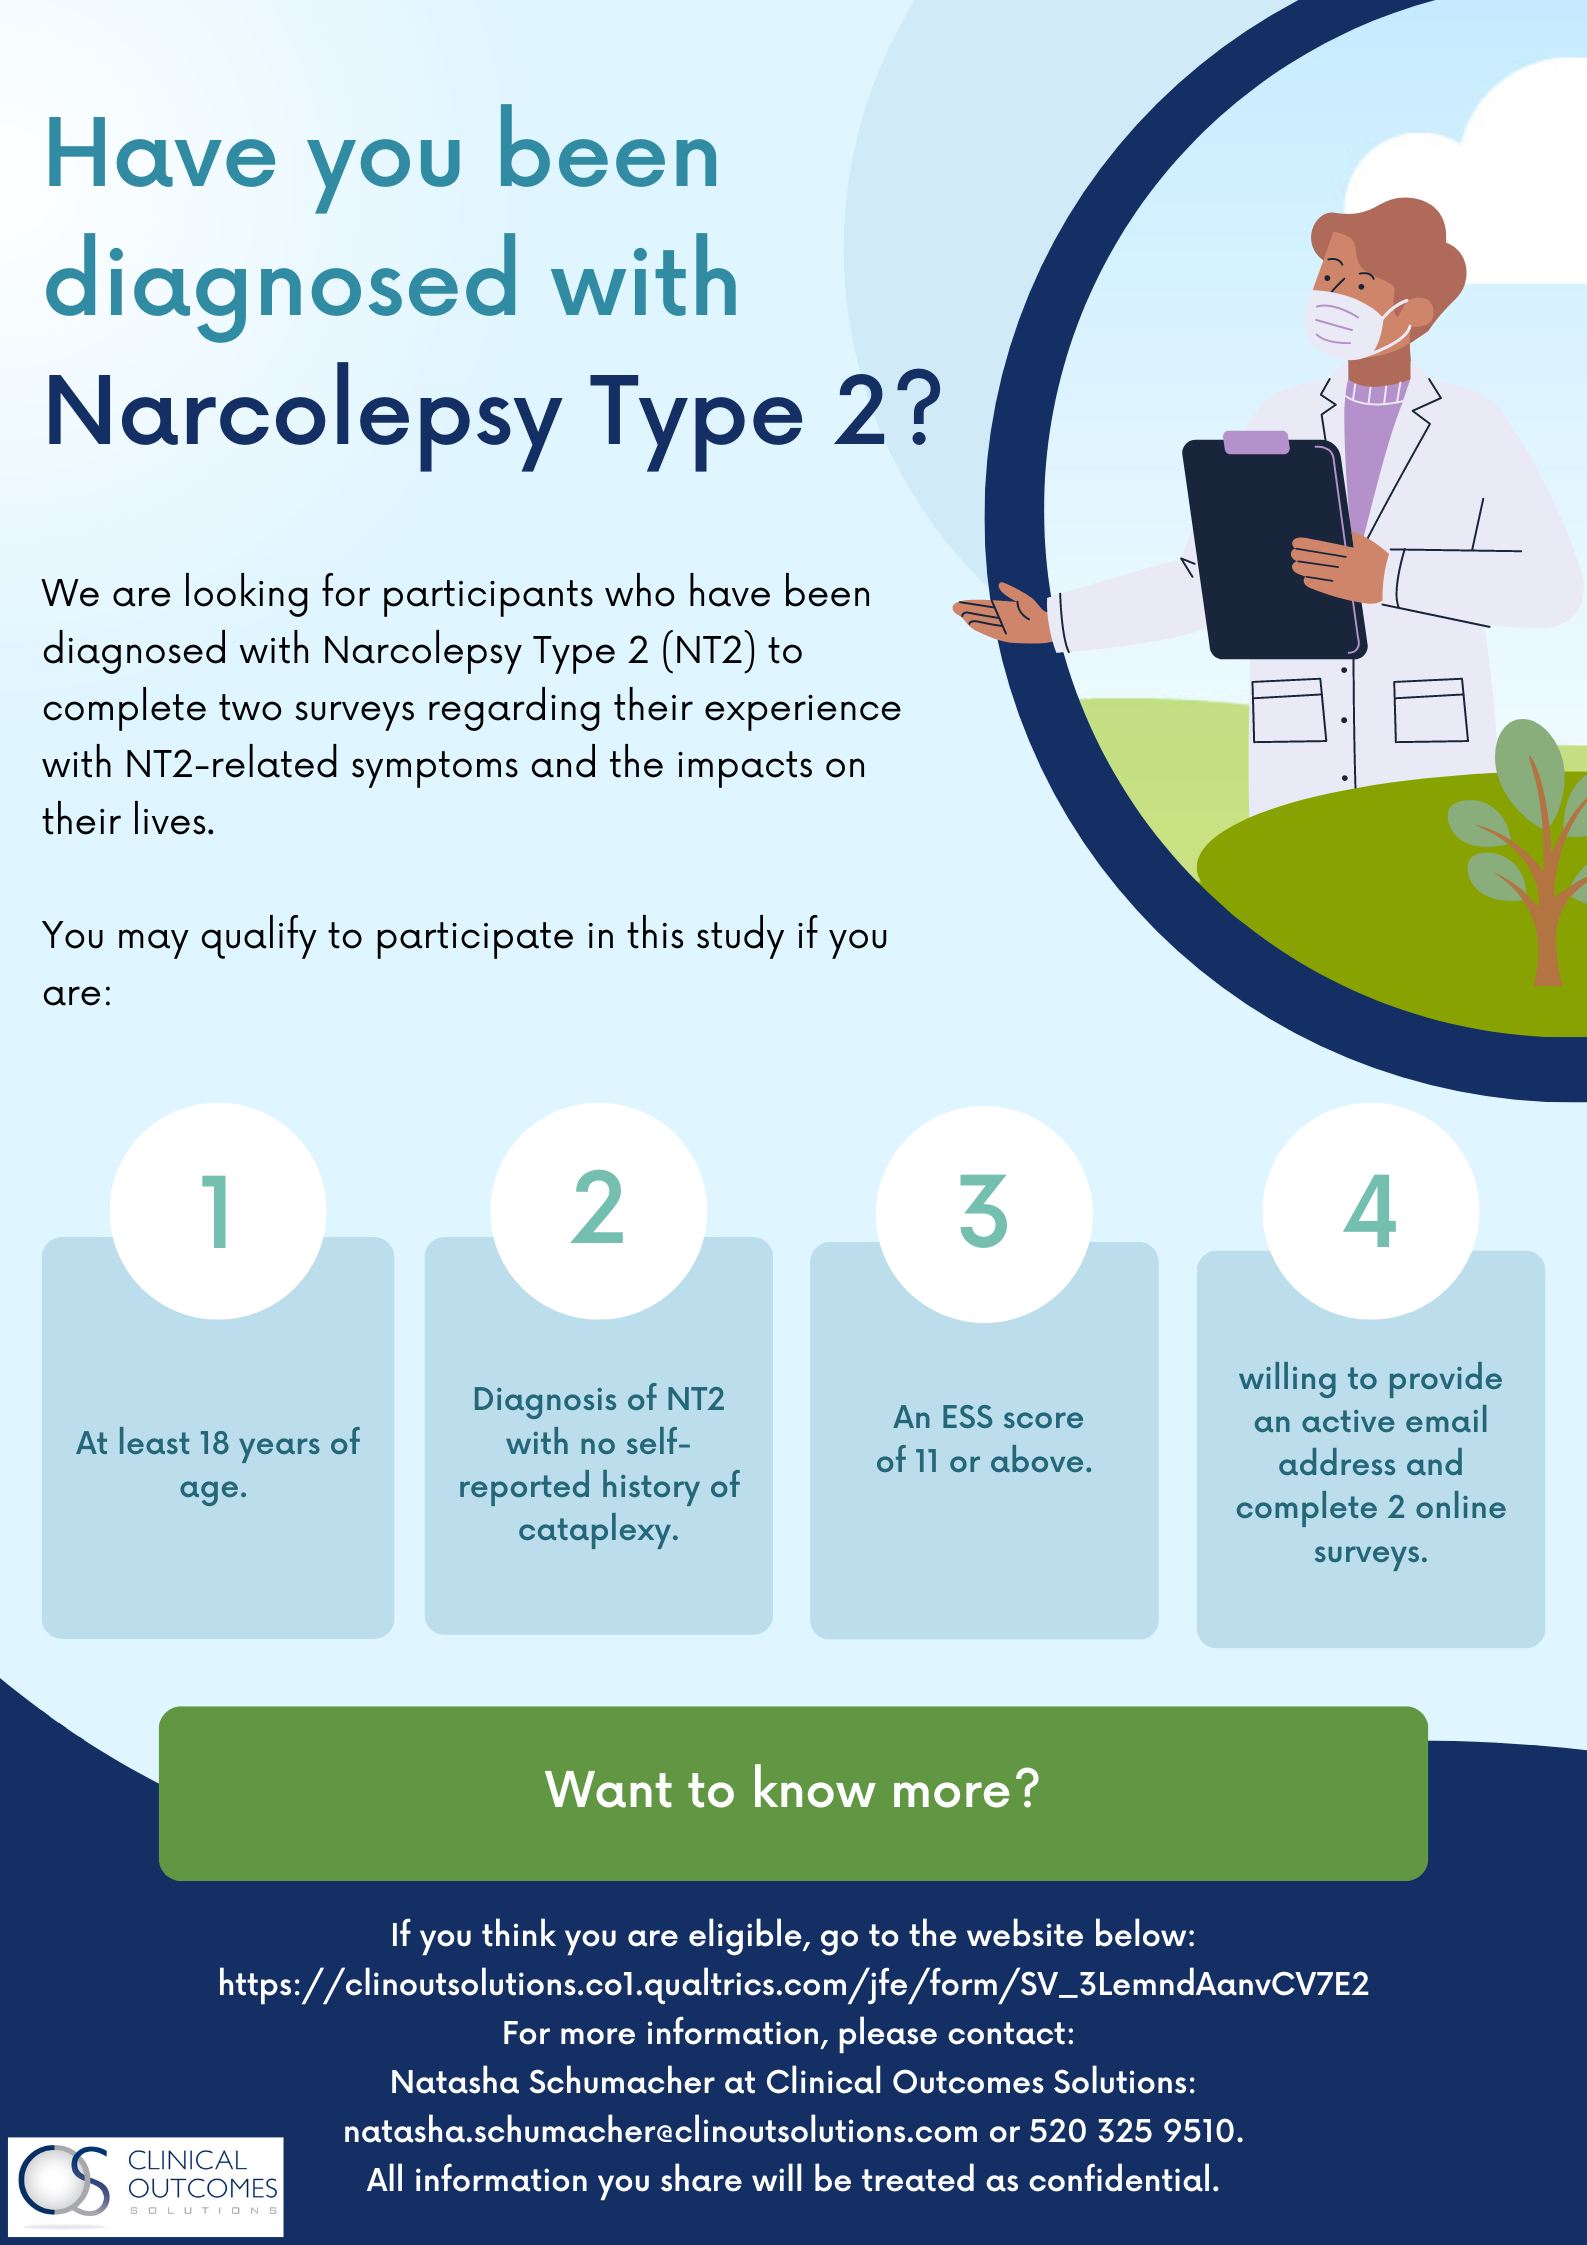 Have you been diagnosed with Narcolepsy Type 2?